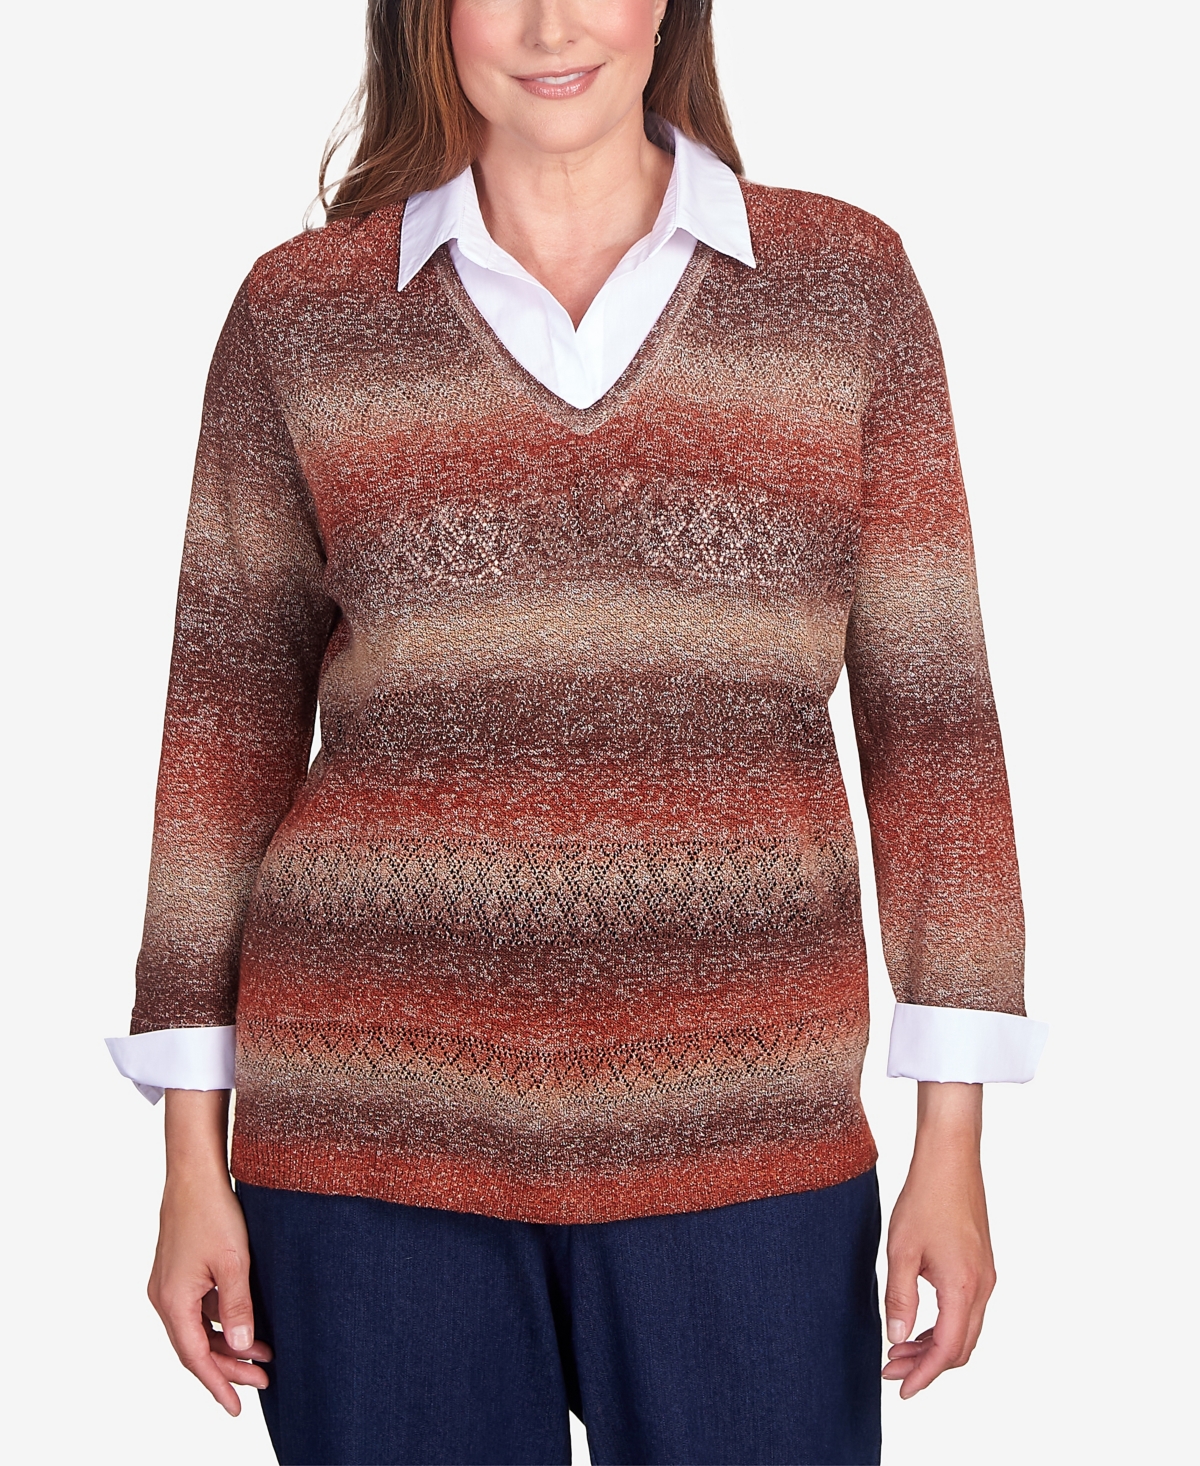 Petite Classic Space Dye with Woven Trim Layered Sweater - Brown, Rust